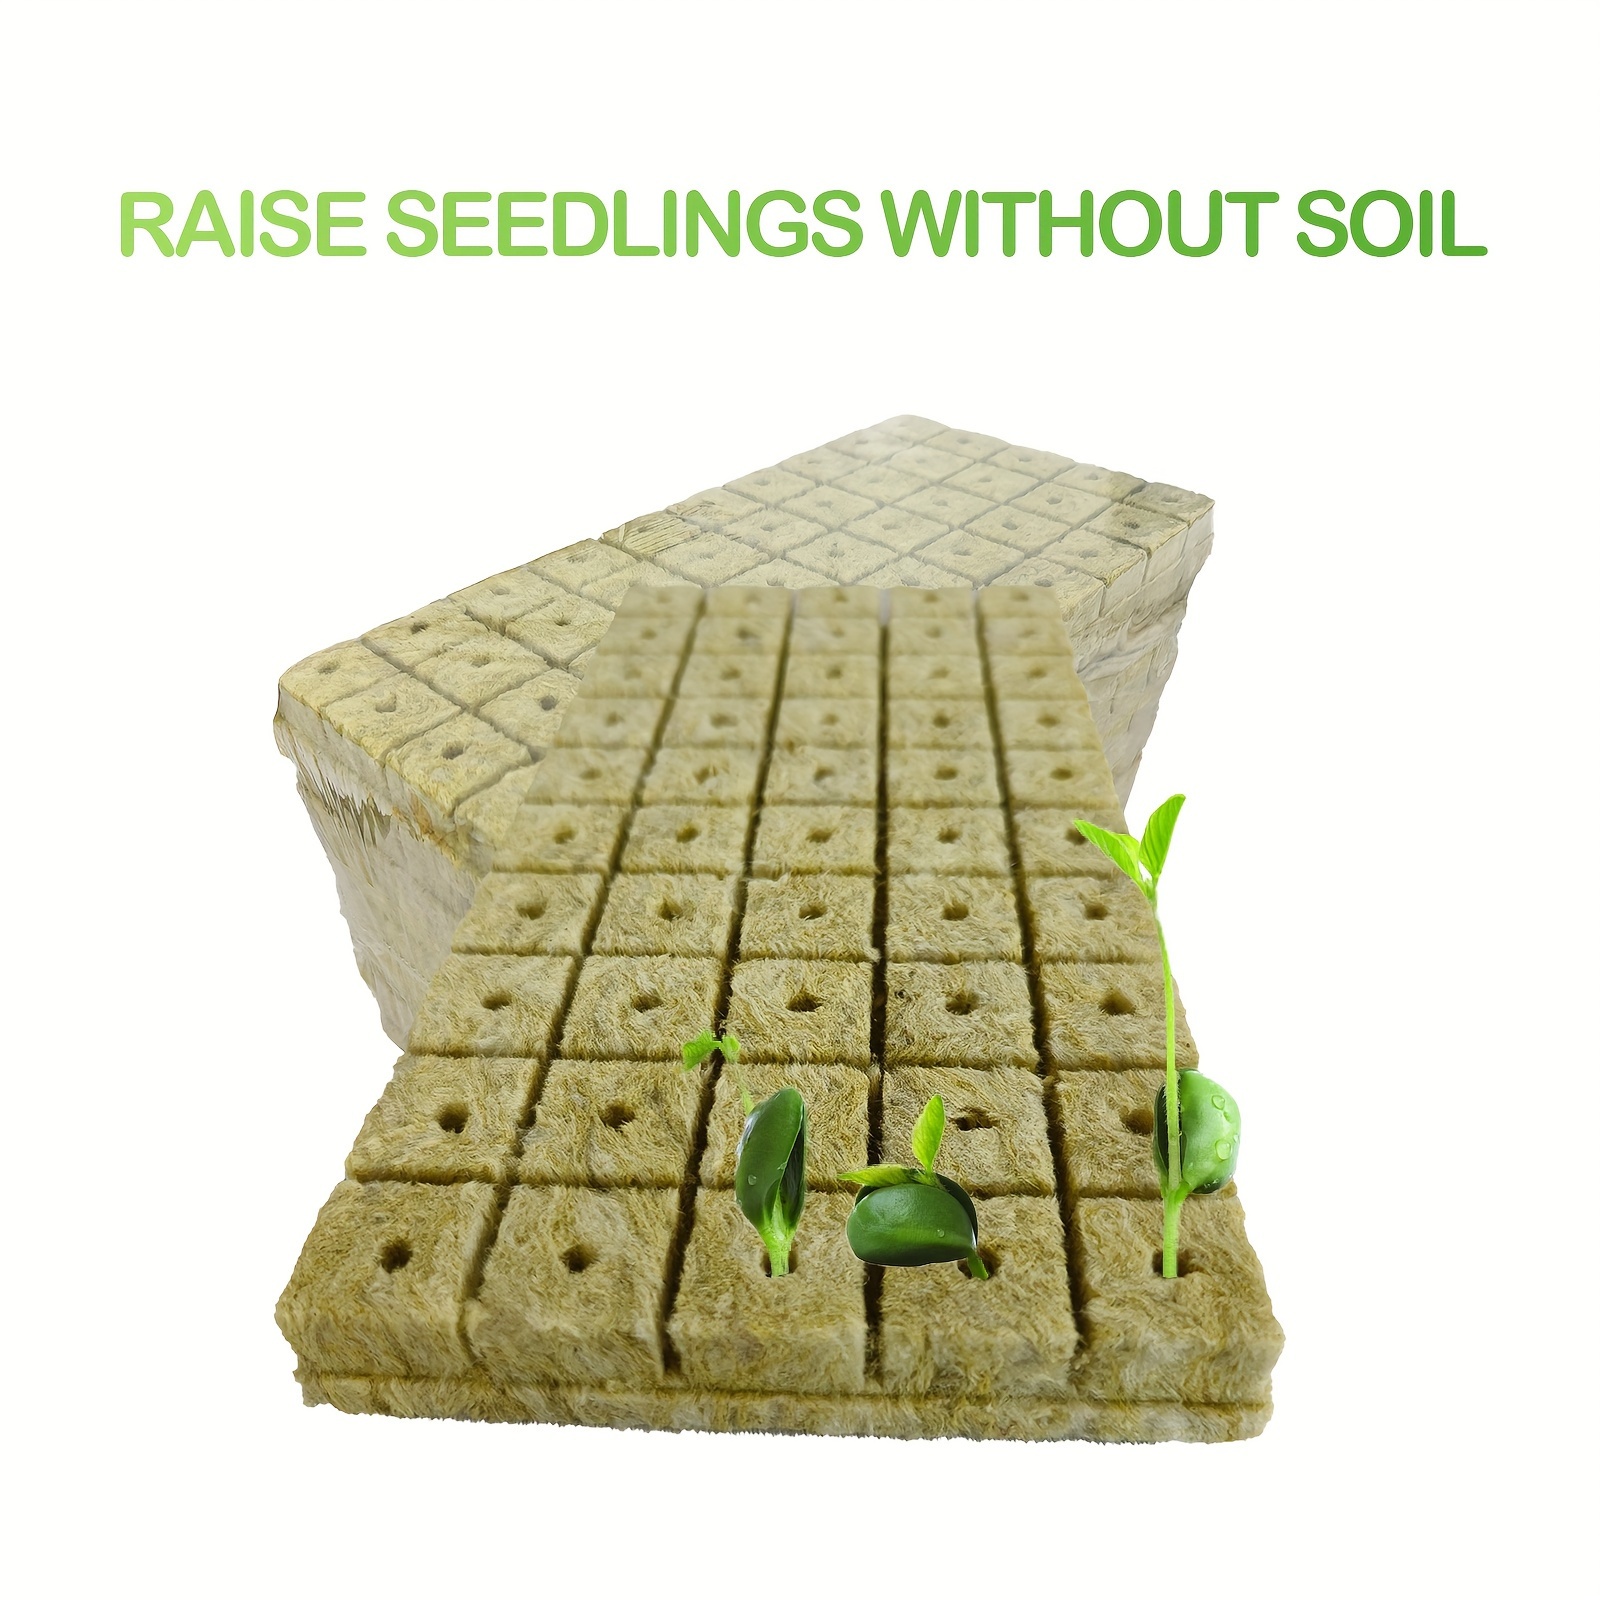 

100pcs Grow Cubes 1inch - Hydroponic Seed Starter Plugs For Soilless Cultivation, Plant Propagation & Cuttings, Ideal For Indoor & Outdoor Gardening